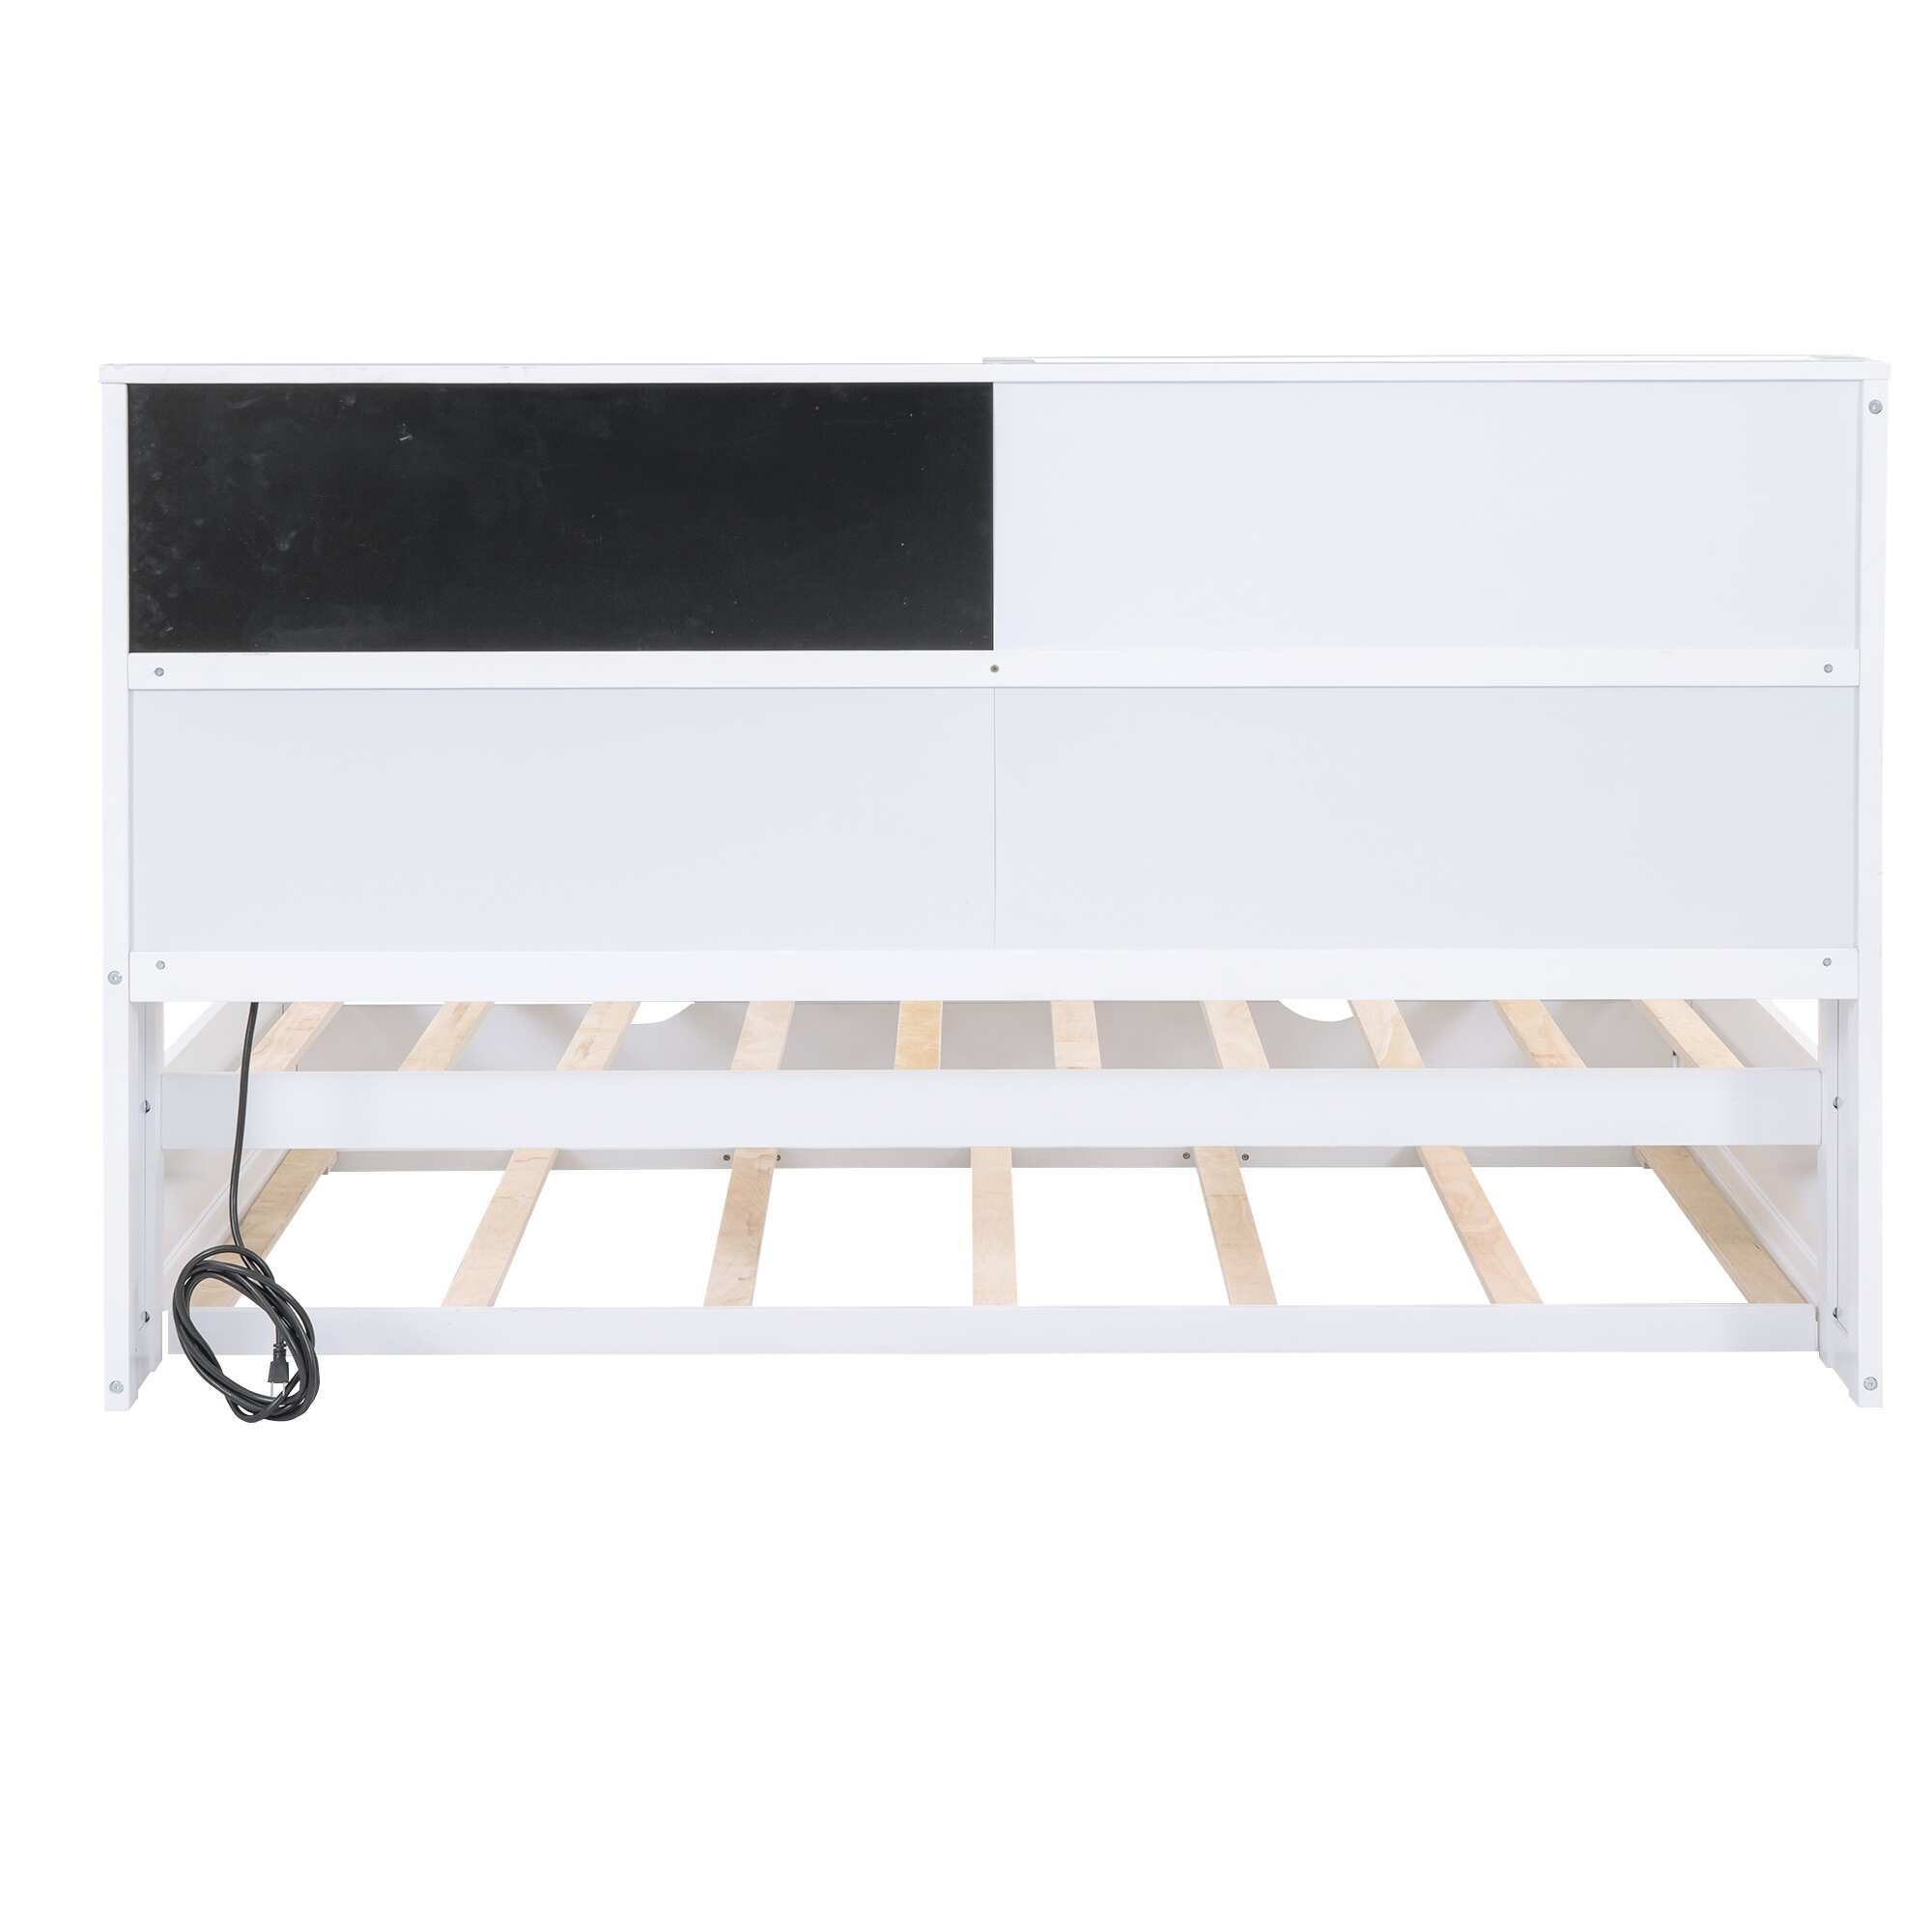 Twin Size Daybed with Twin Trundles for Kids Boys Girls, Wood Bed with Storage Shelves, Blackboard, Cork Board and USB Ports